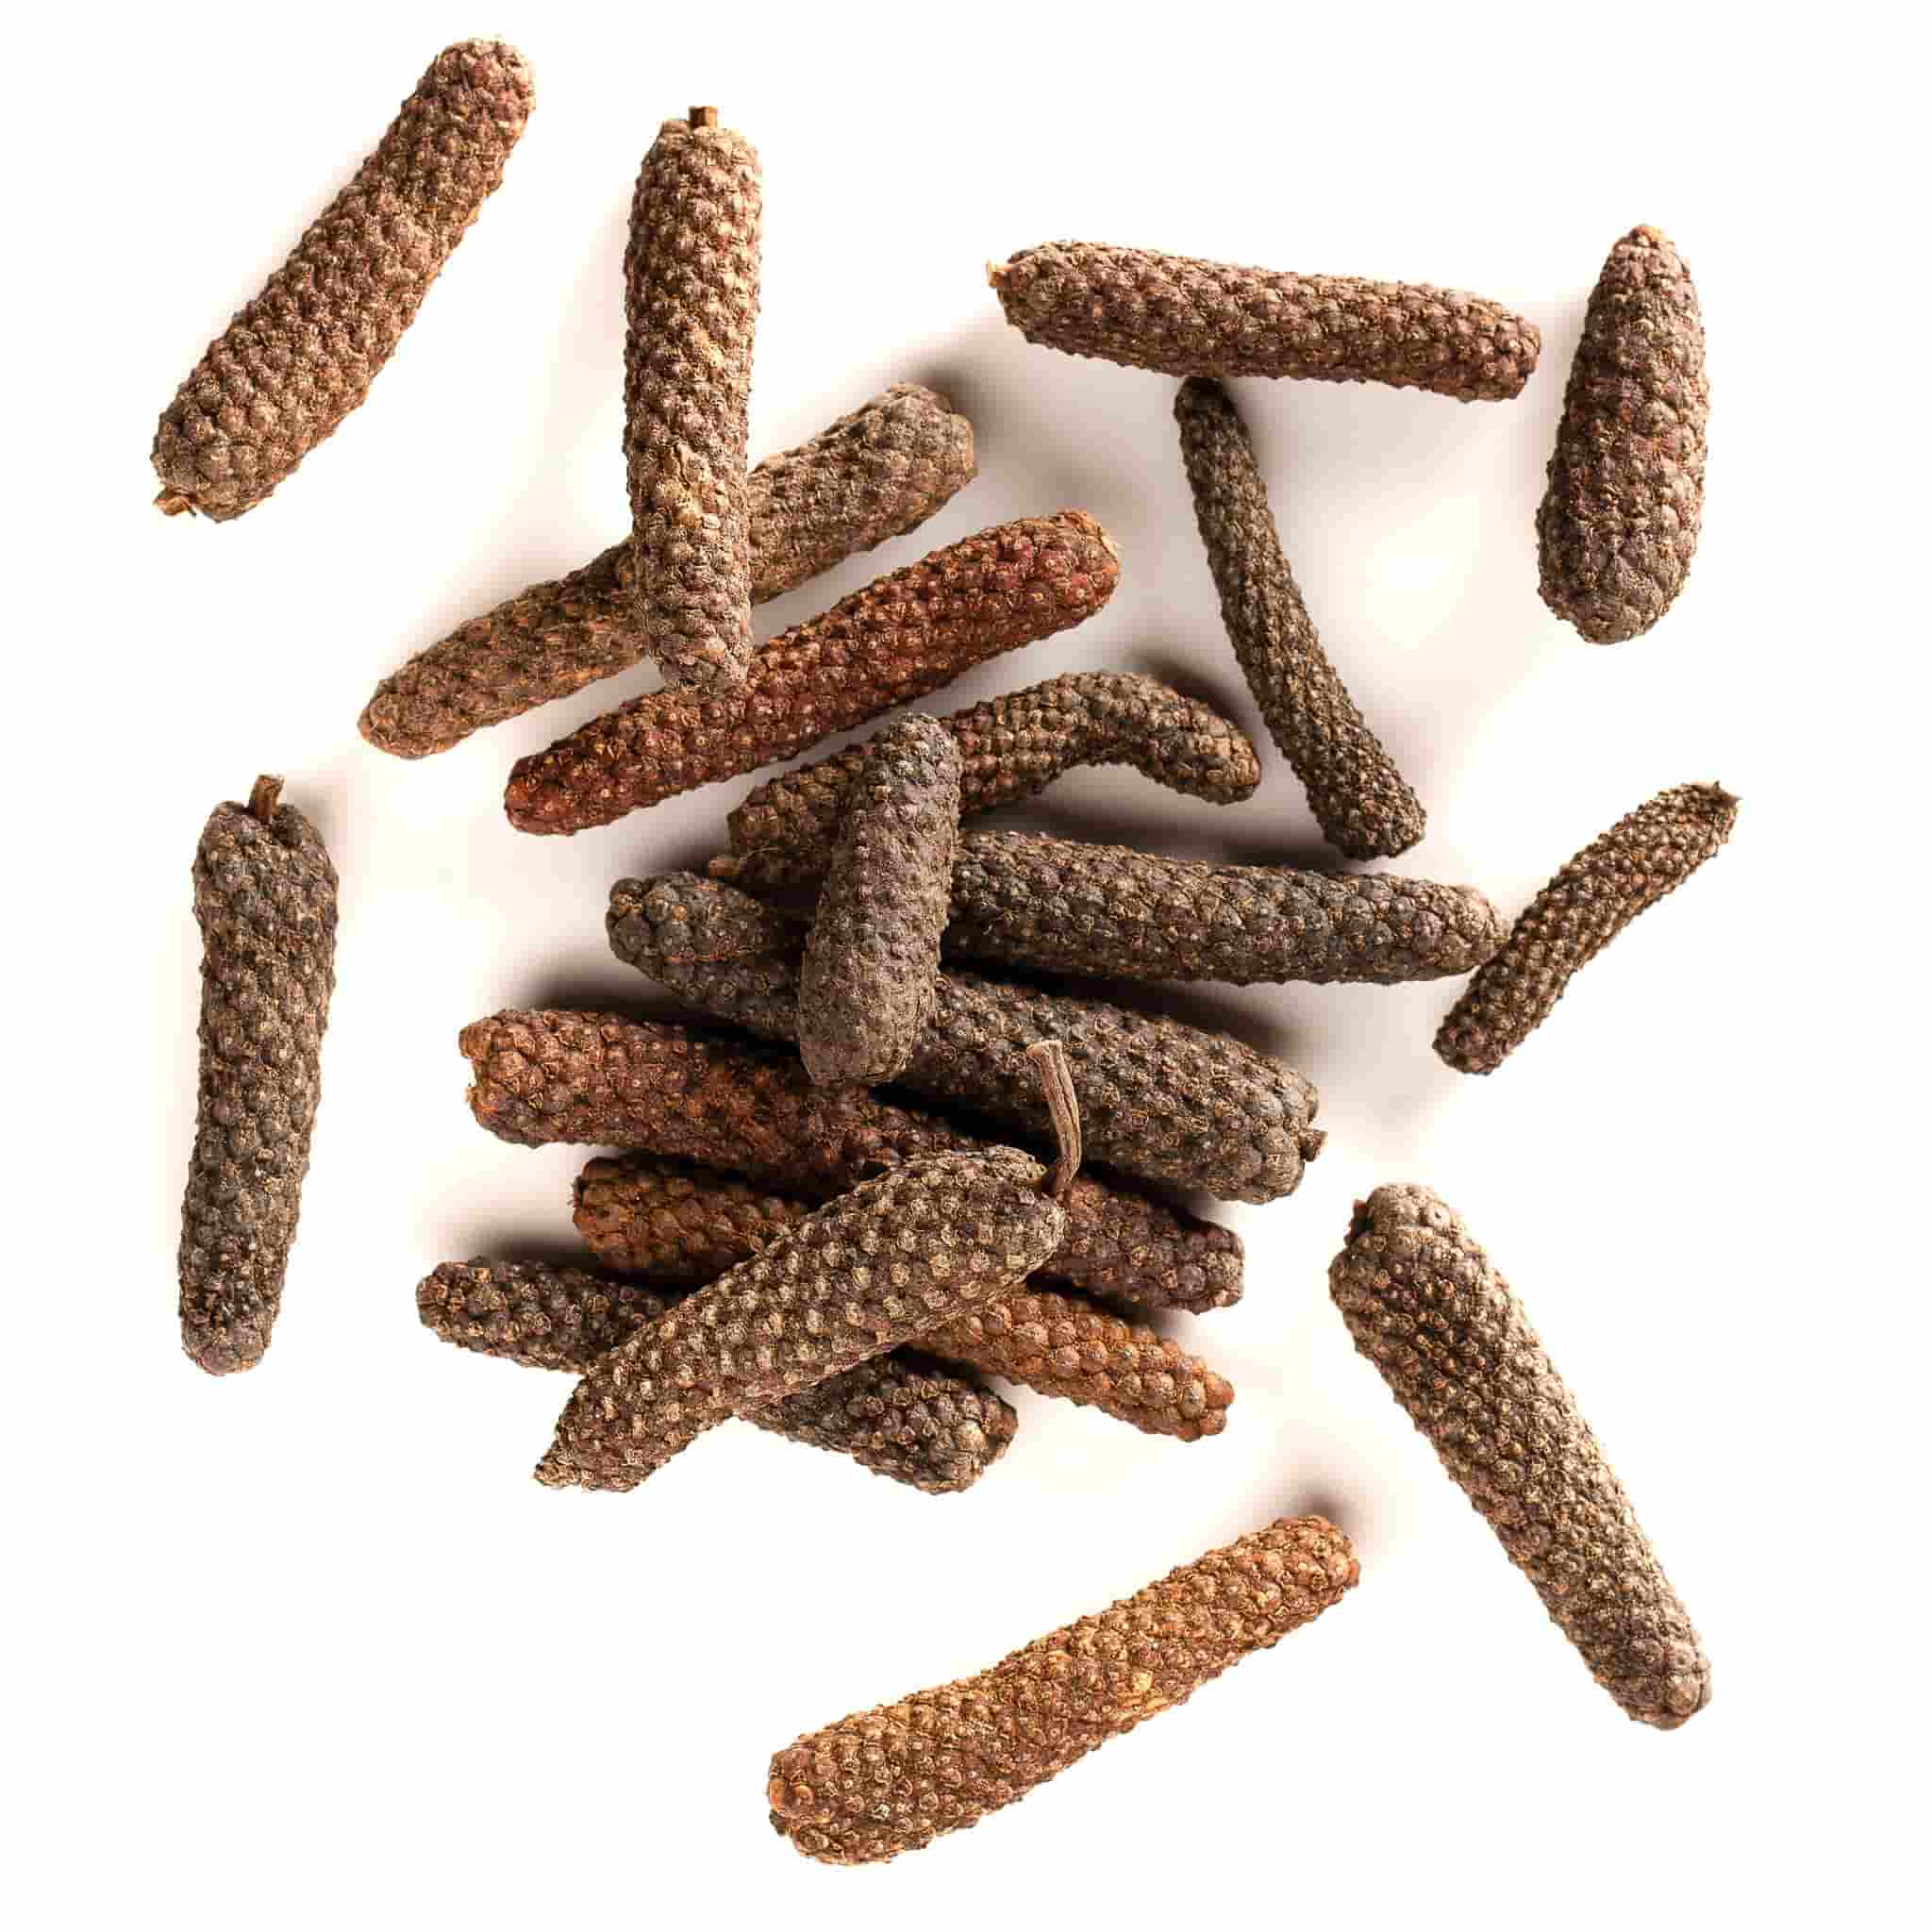 Terre Exotique Java Long Pepper 500g product image